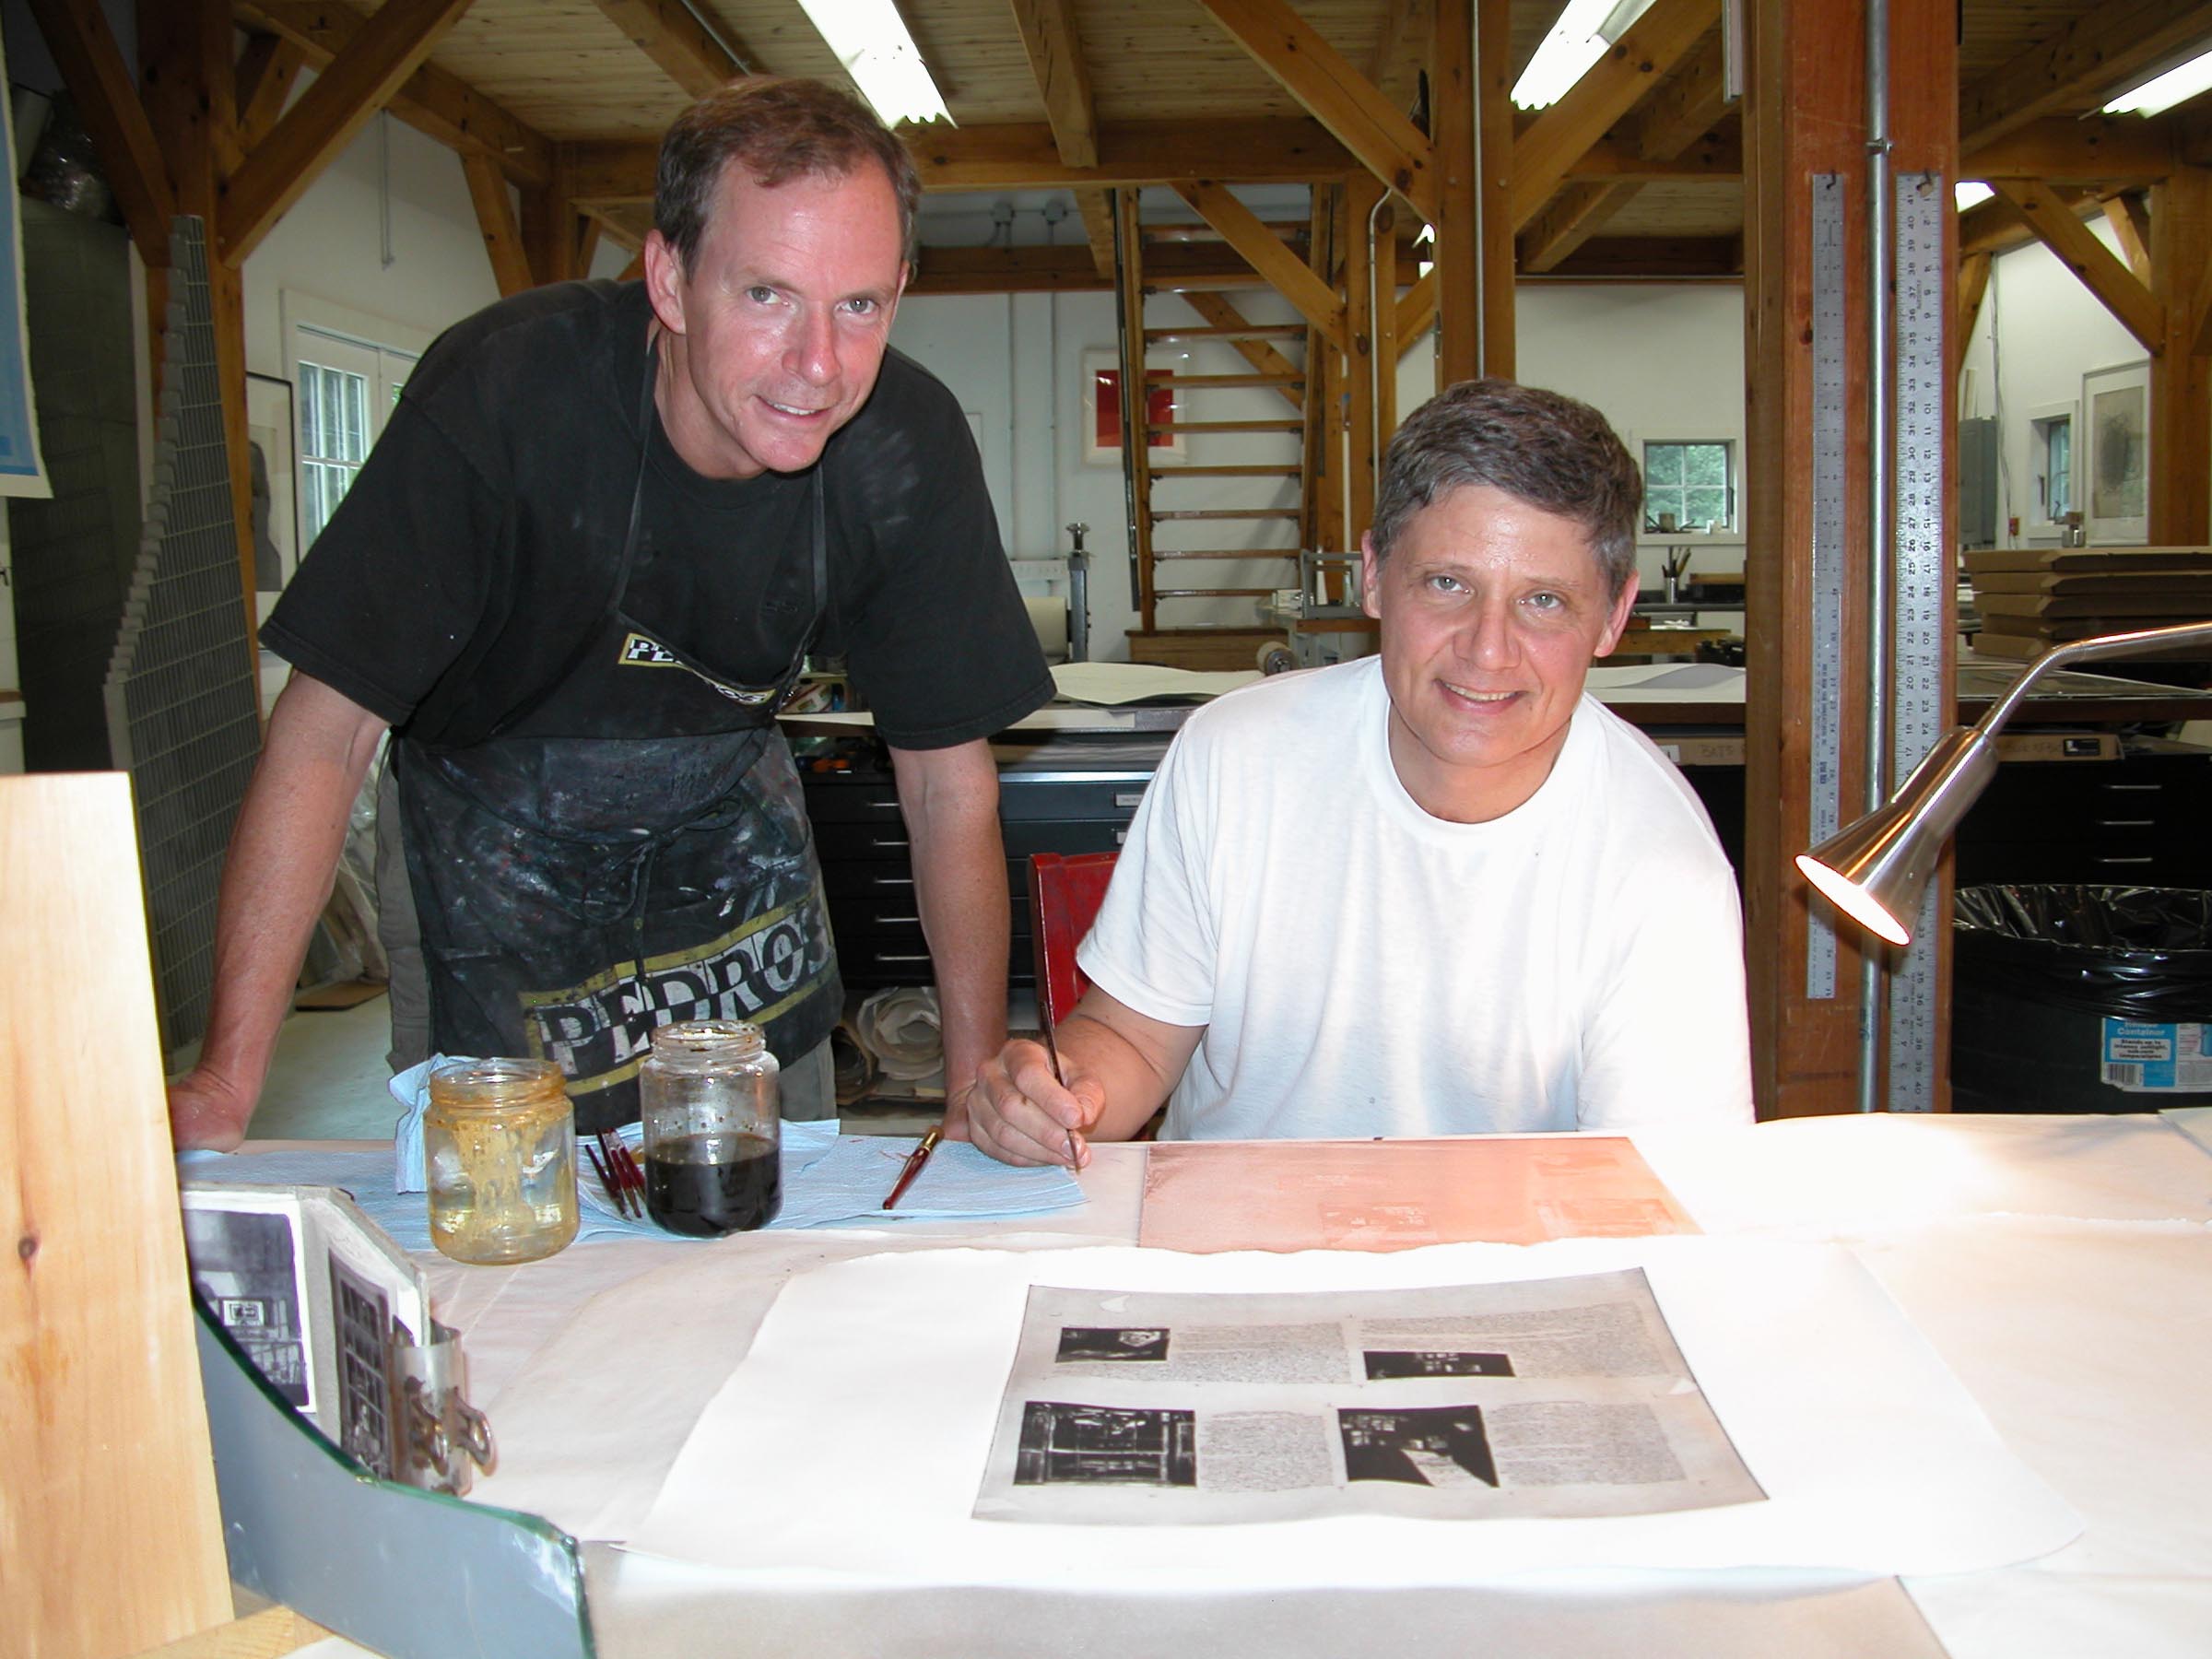 Photograph of James Stroud and Charles Ritchie at Center Street Studio, Milton, MA in May 2008 image